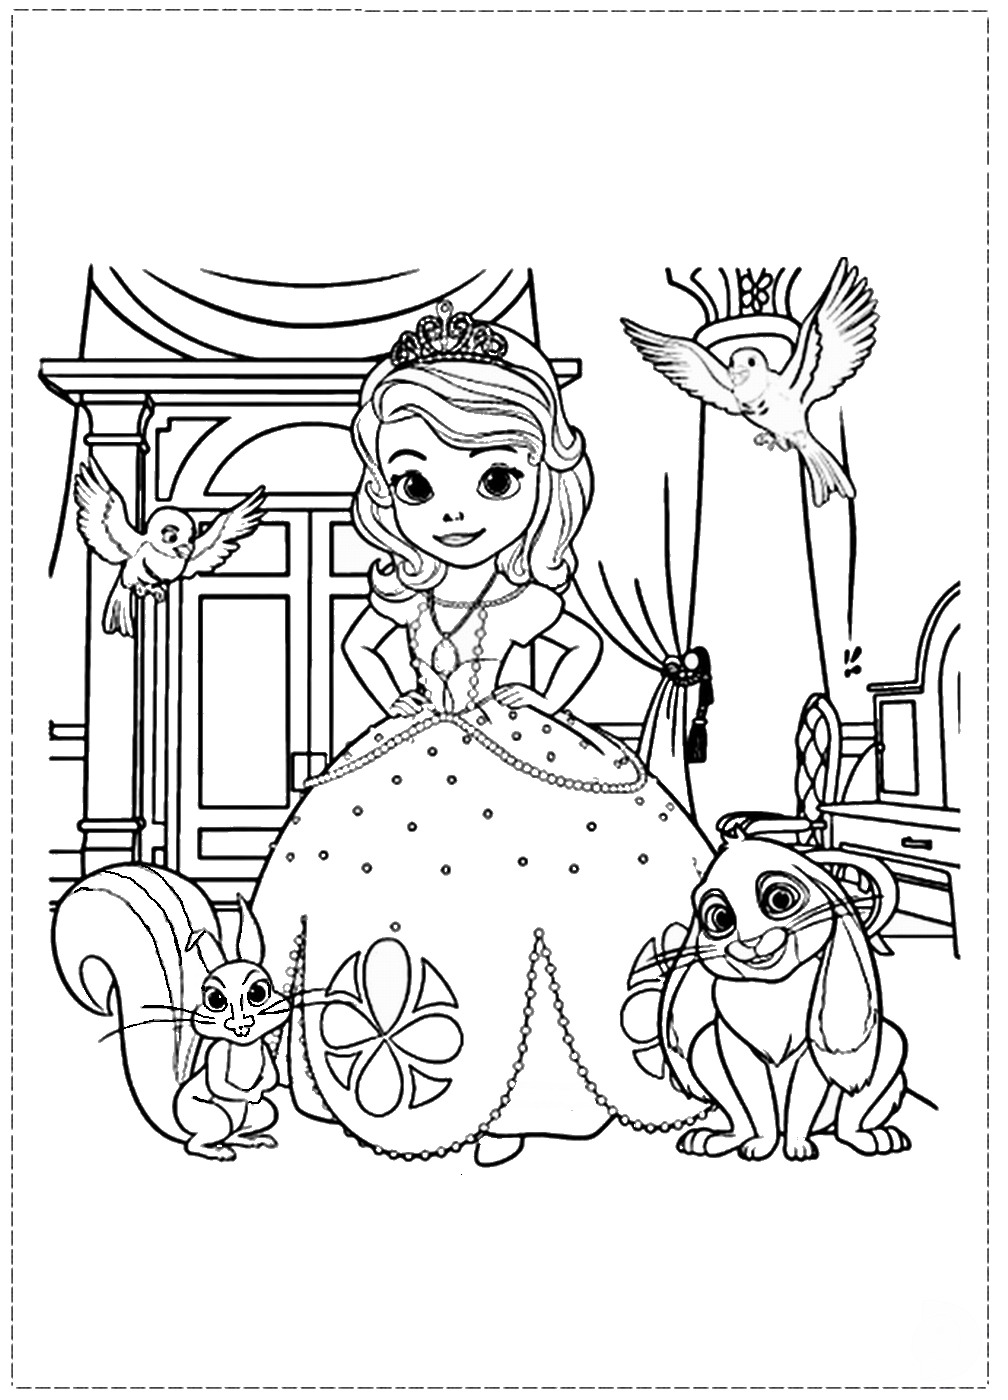 sofia-the-first-coloring-pages